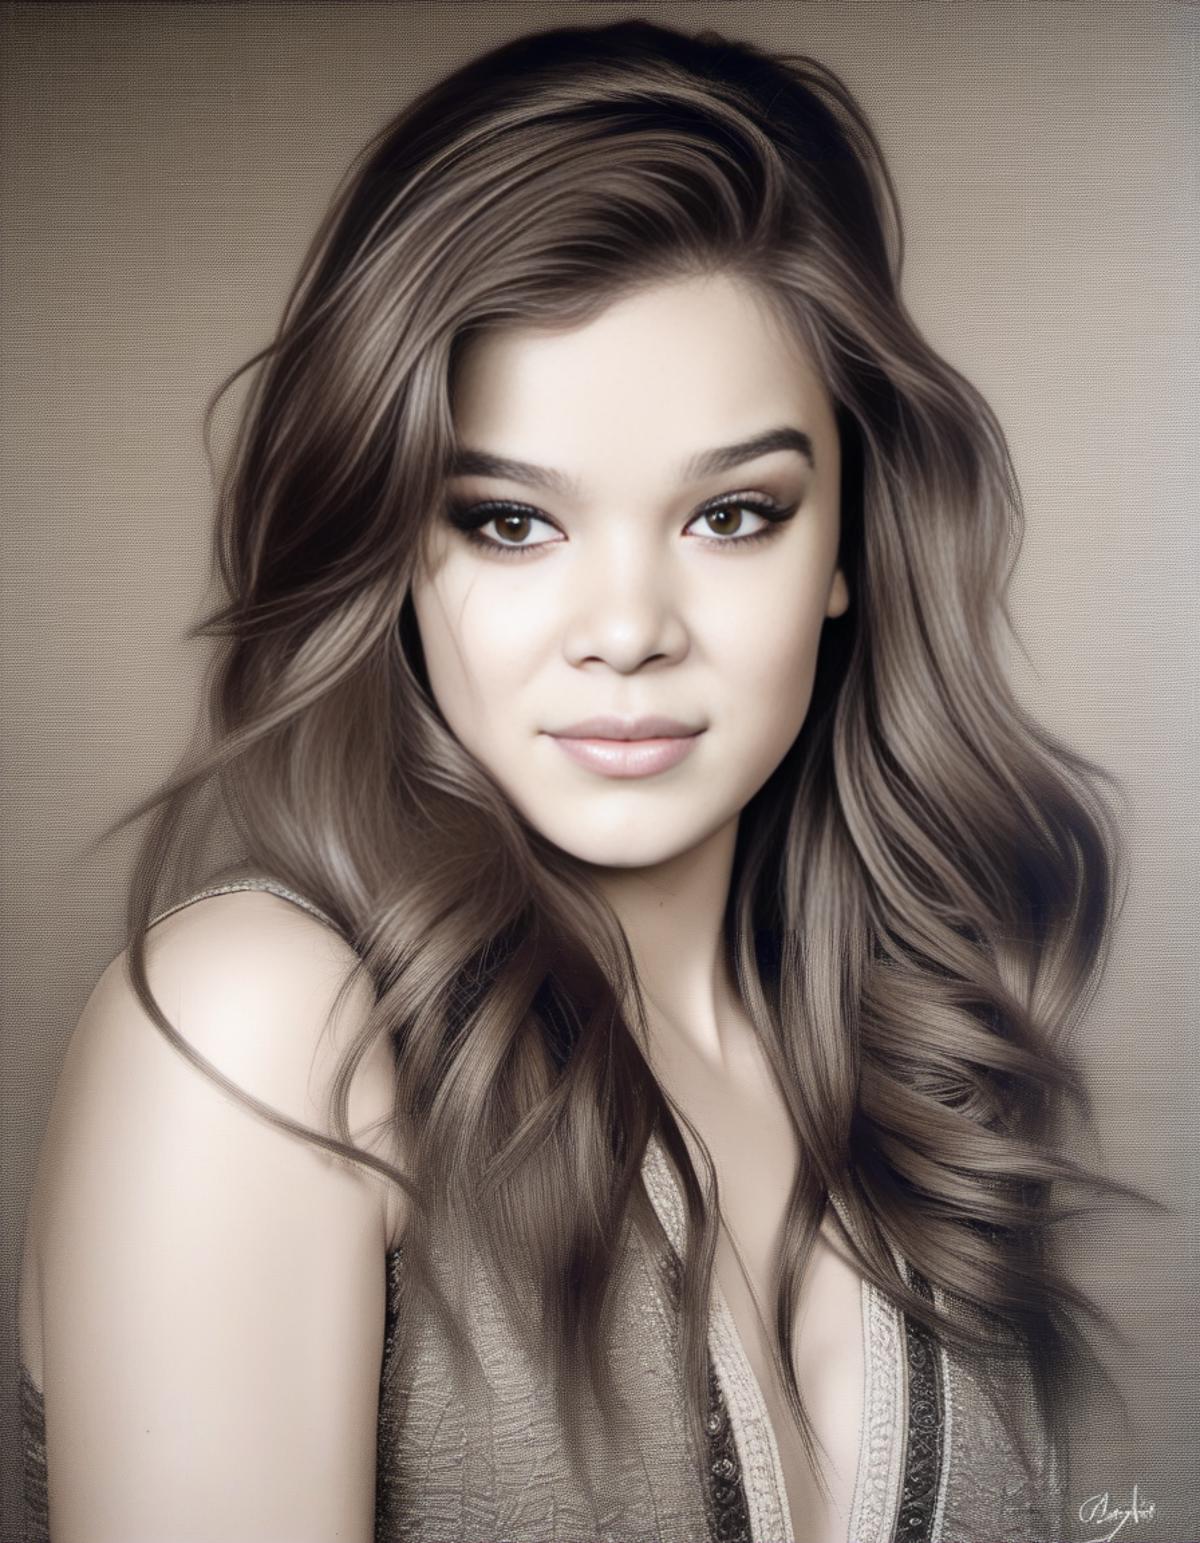 Hailee Steinfeld image by parar20